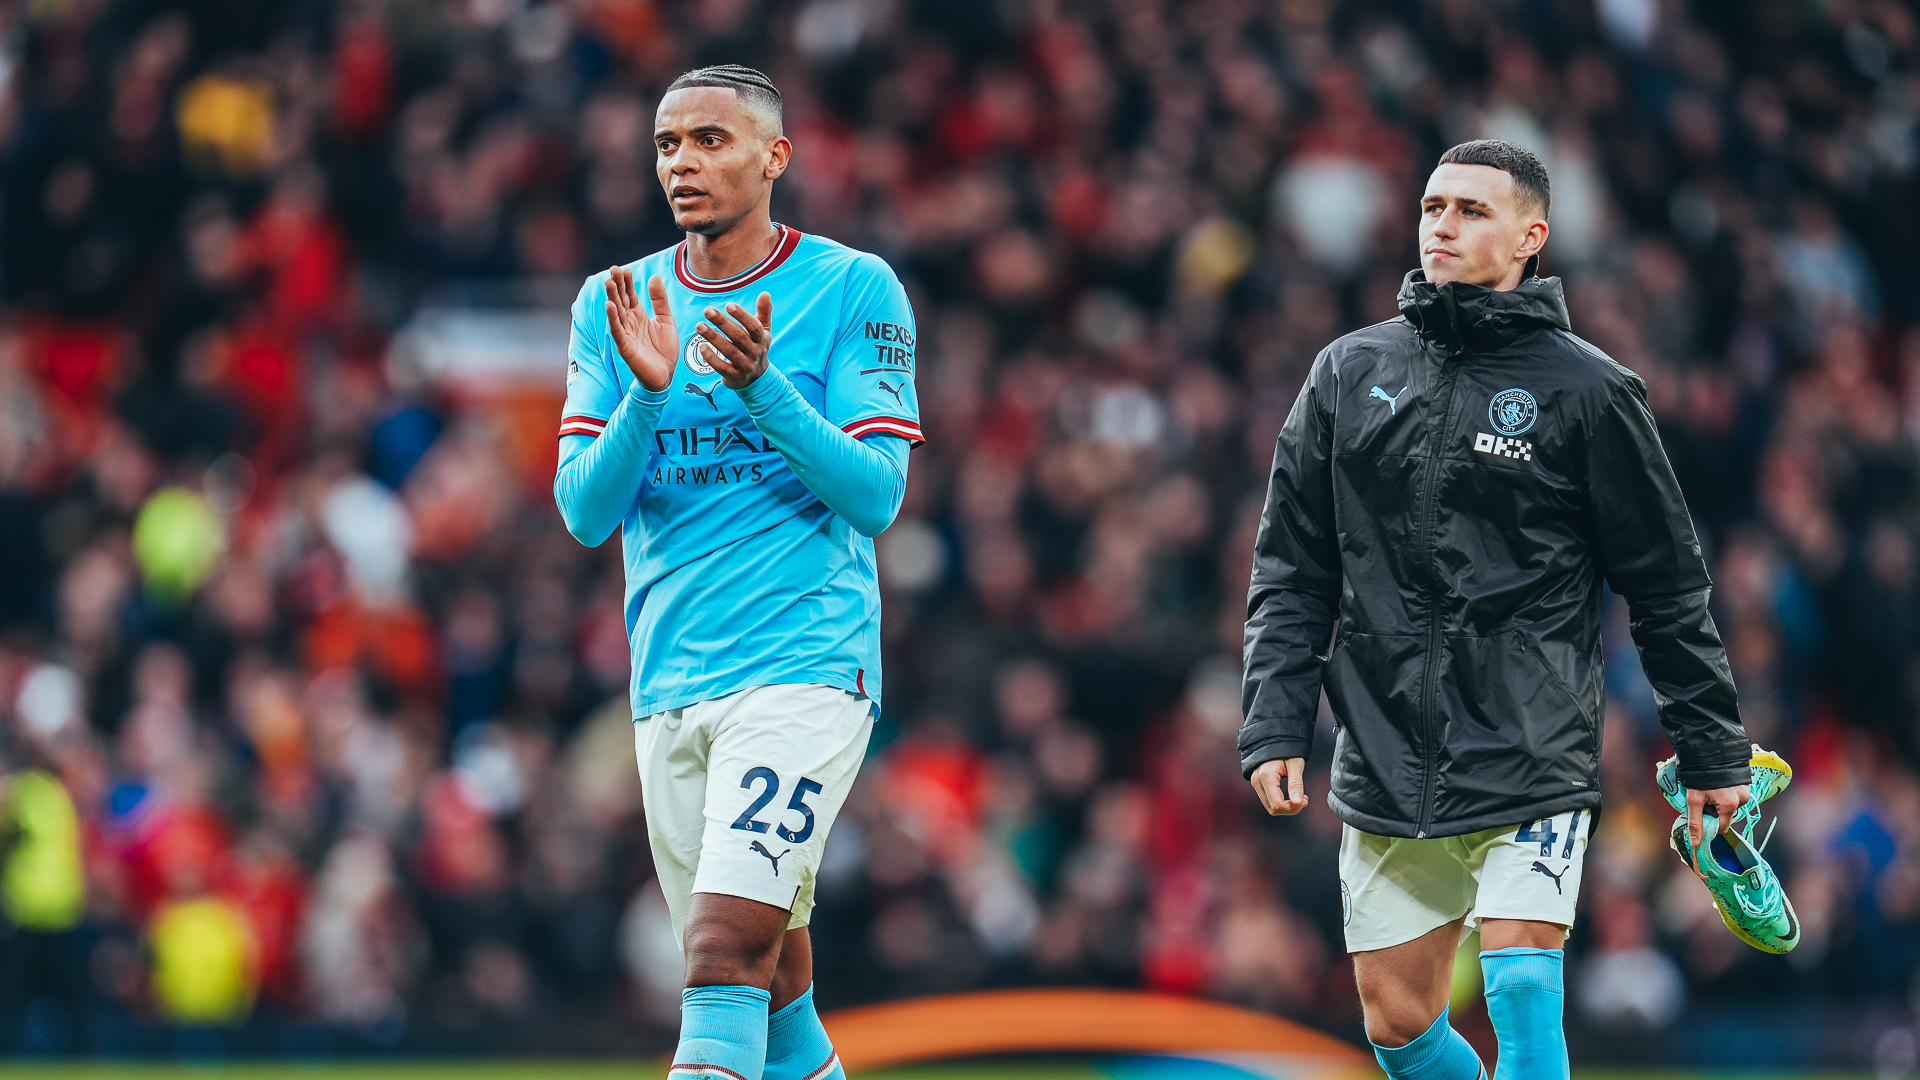 FRUSTRATION: Manuel Akanji and Phil Foden salute the City fans at full time